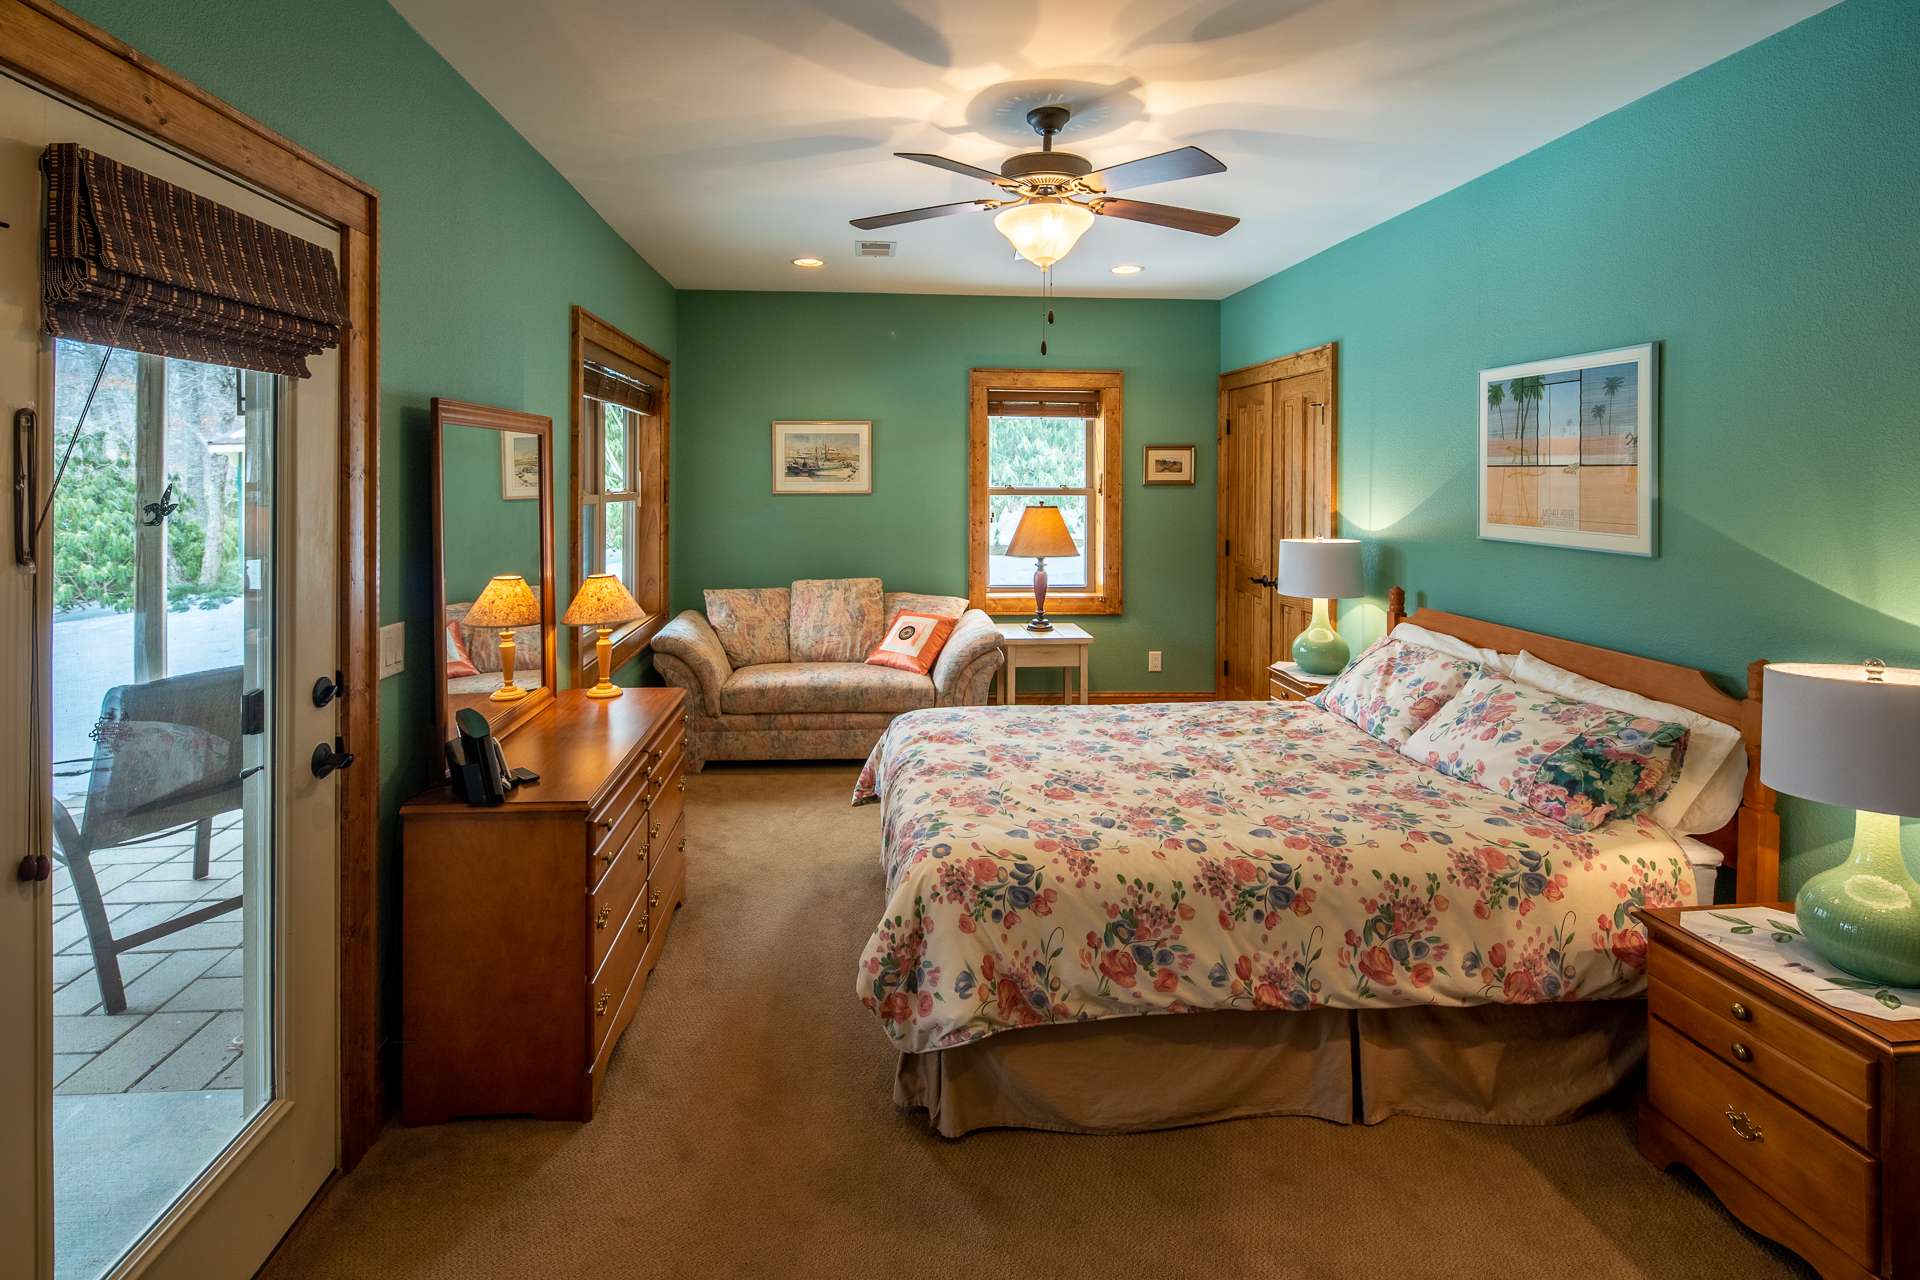 The lower level provides two additional bedrooms for family or guests.